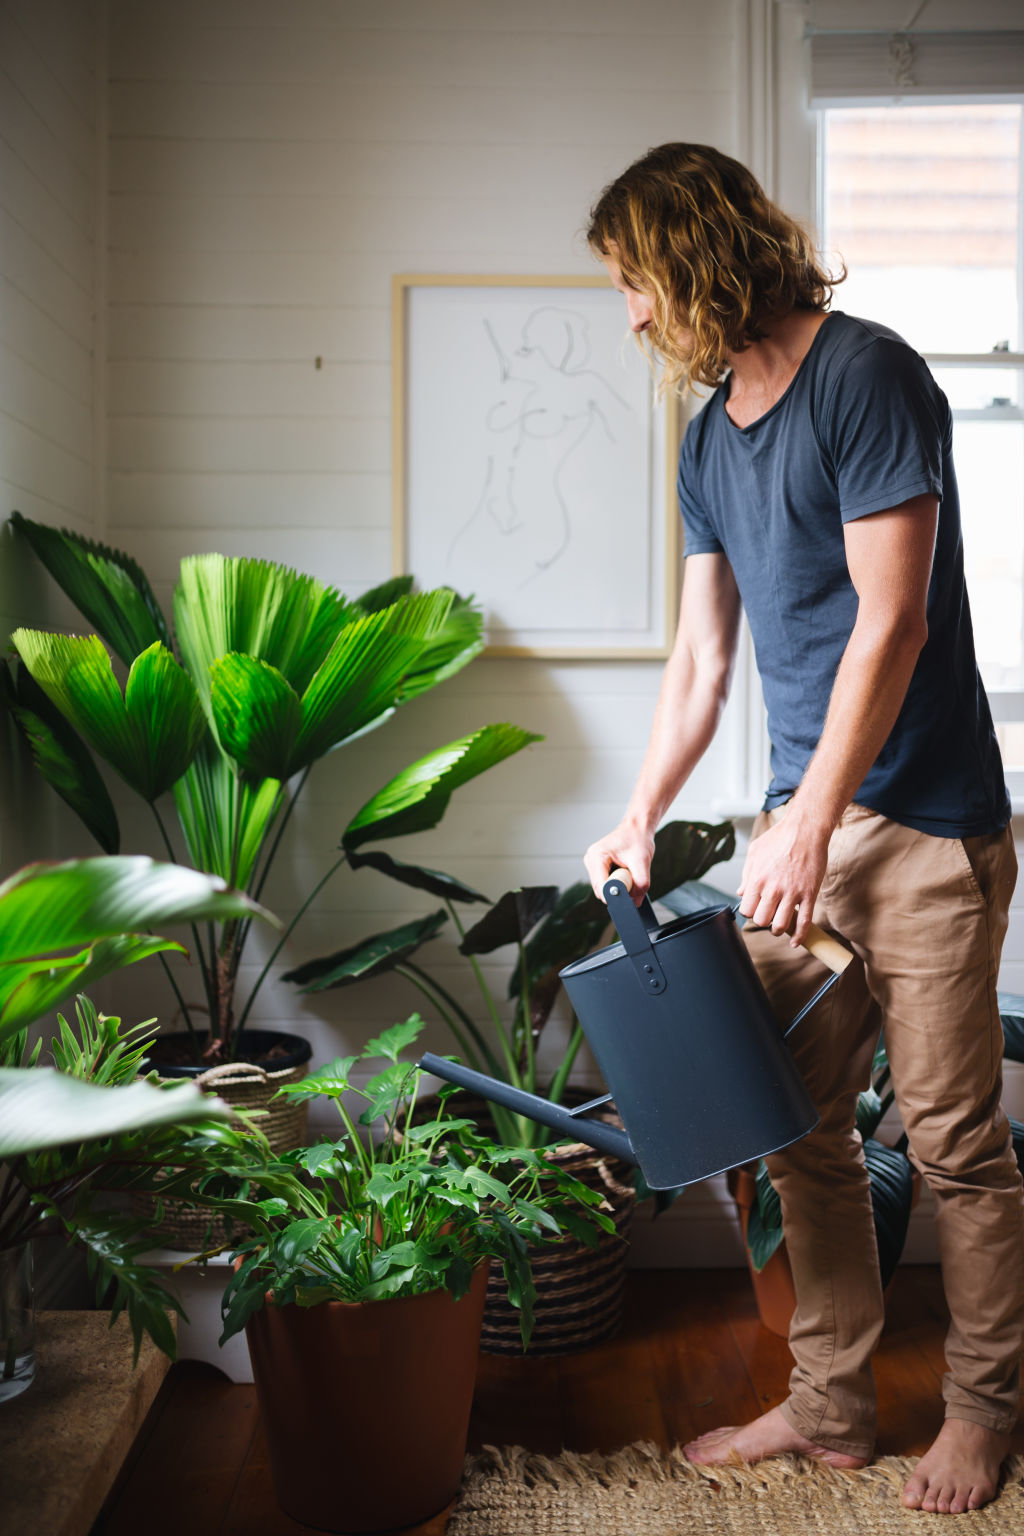 Ensure your pots and plants fit the space appropriately. Photo: Alex Carlyle